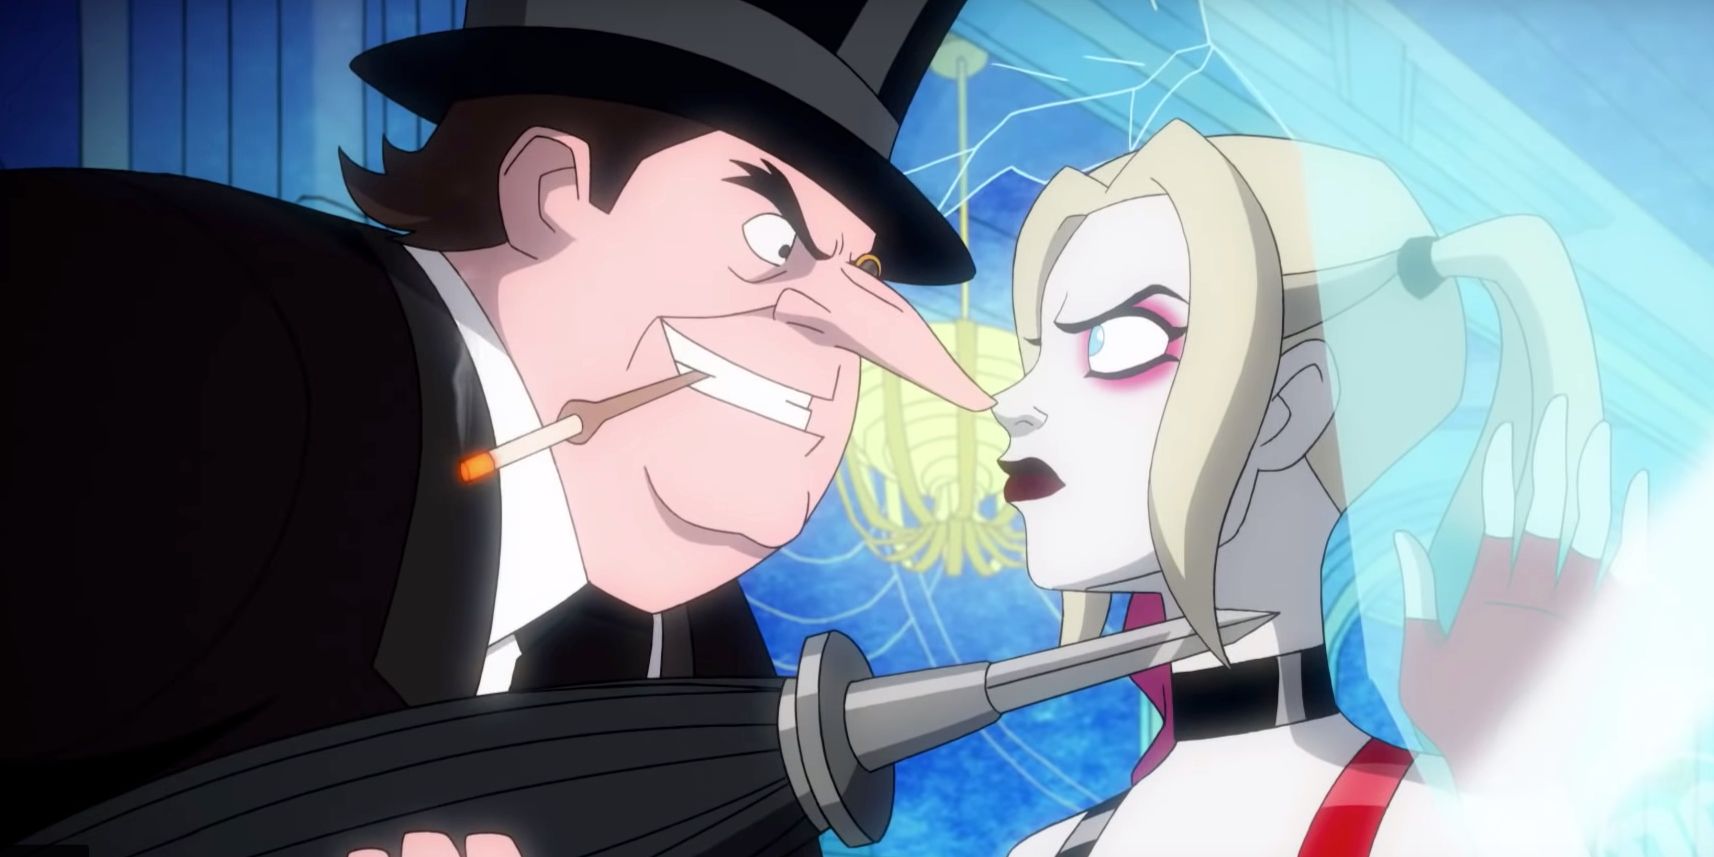 Penguin and Harley Quinn face off in Season 2 episode 1